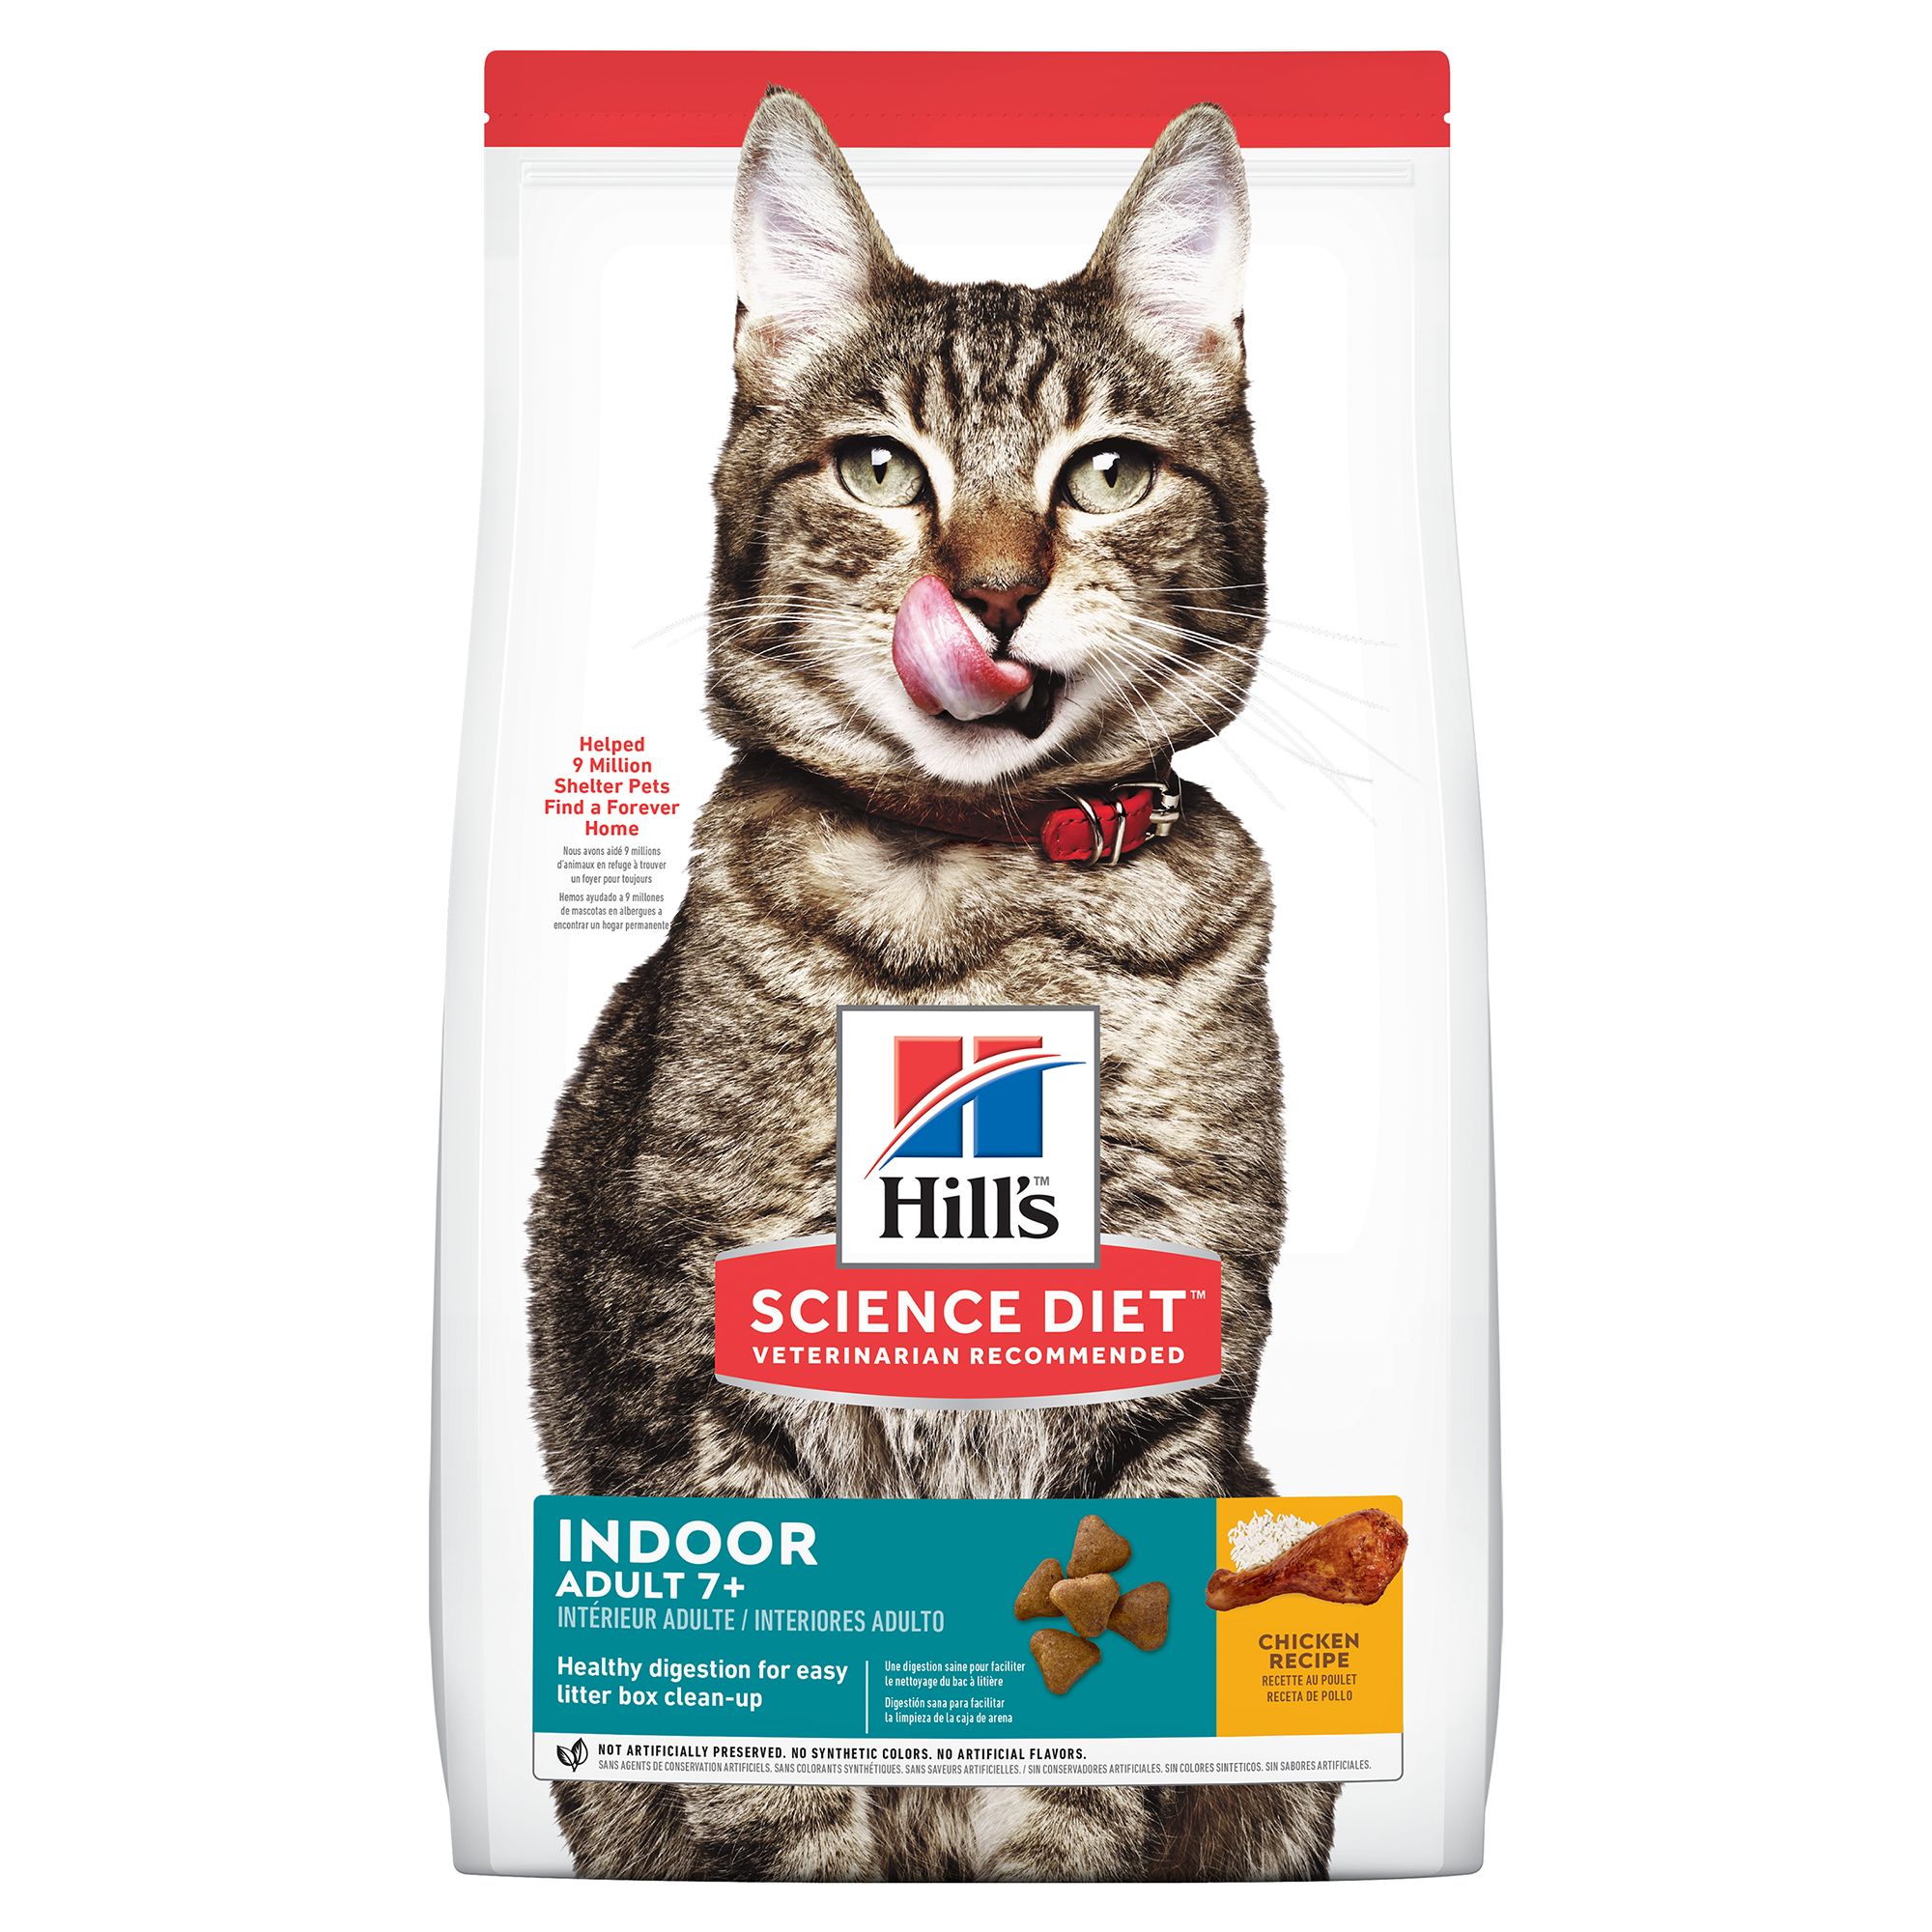 what stores sell science diet cat food?